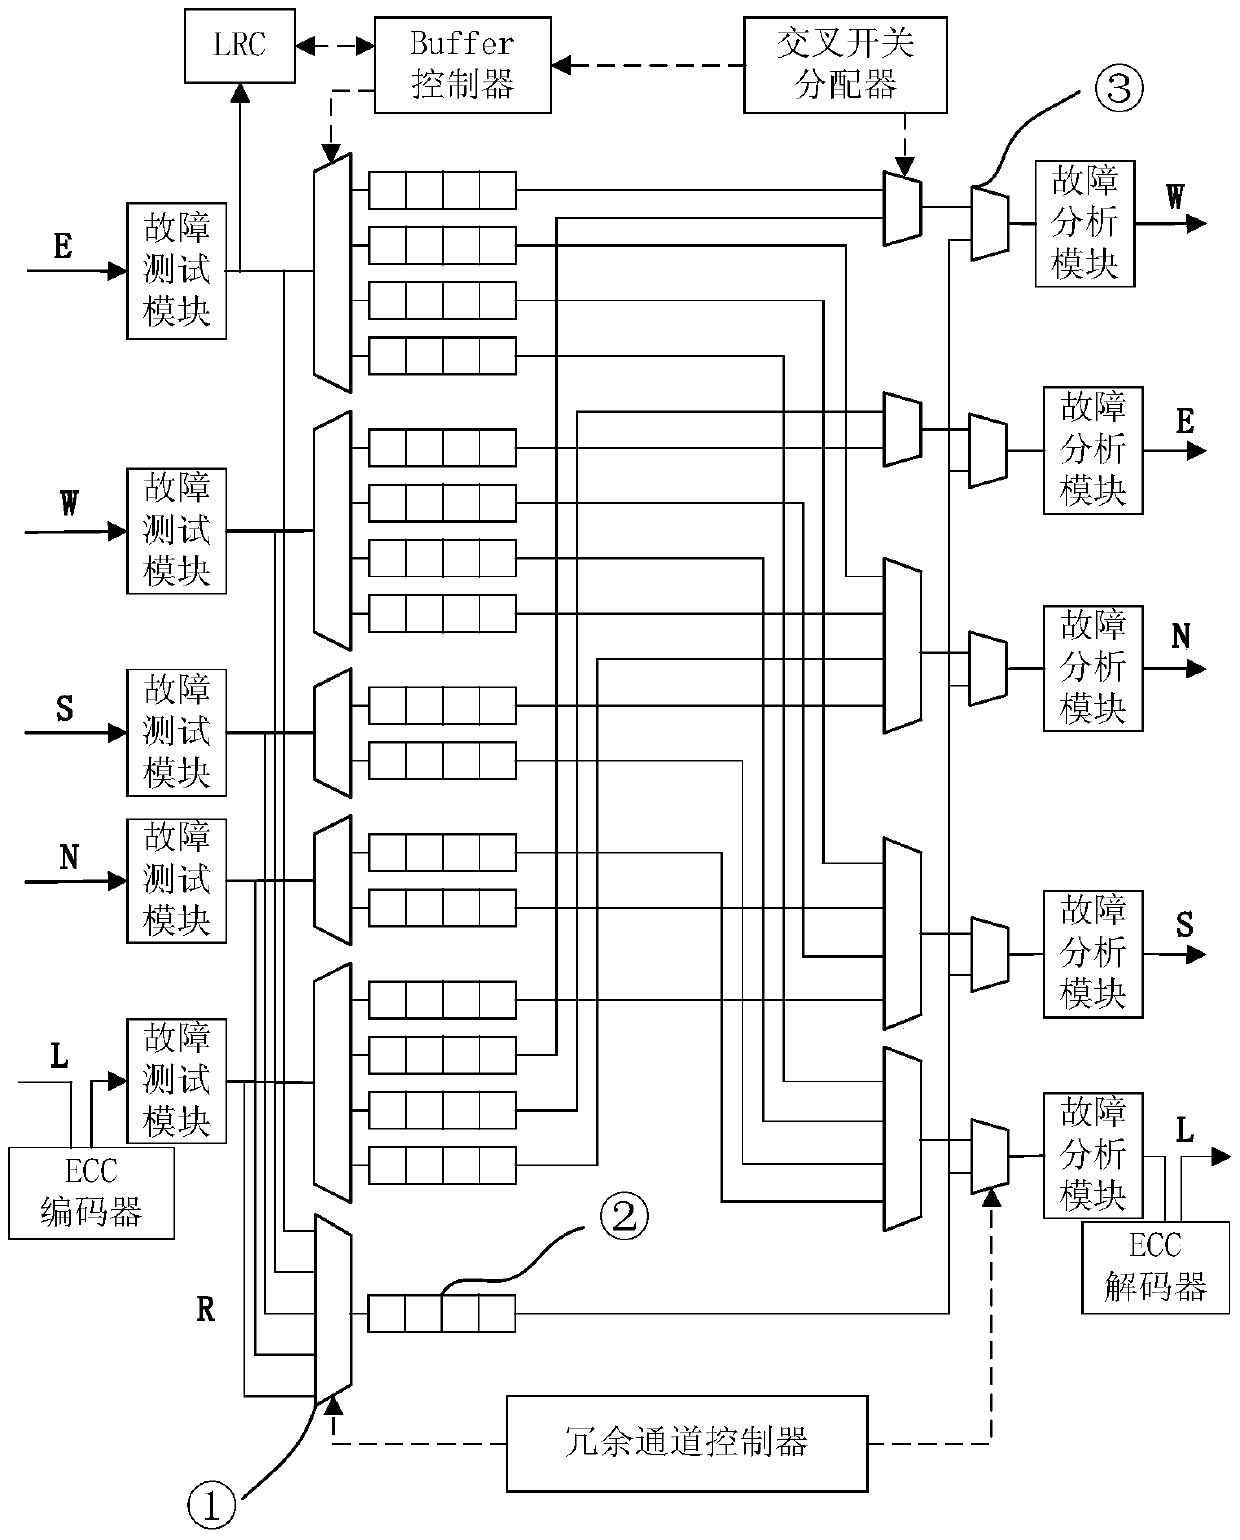 Router Fault Tolerance Method Based on Fault Channel Isolation Detection in Network-on-Chip